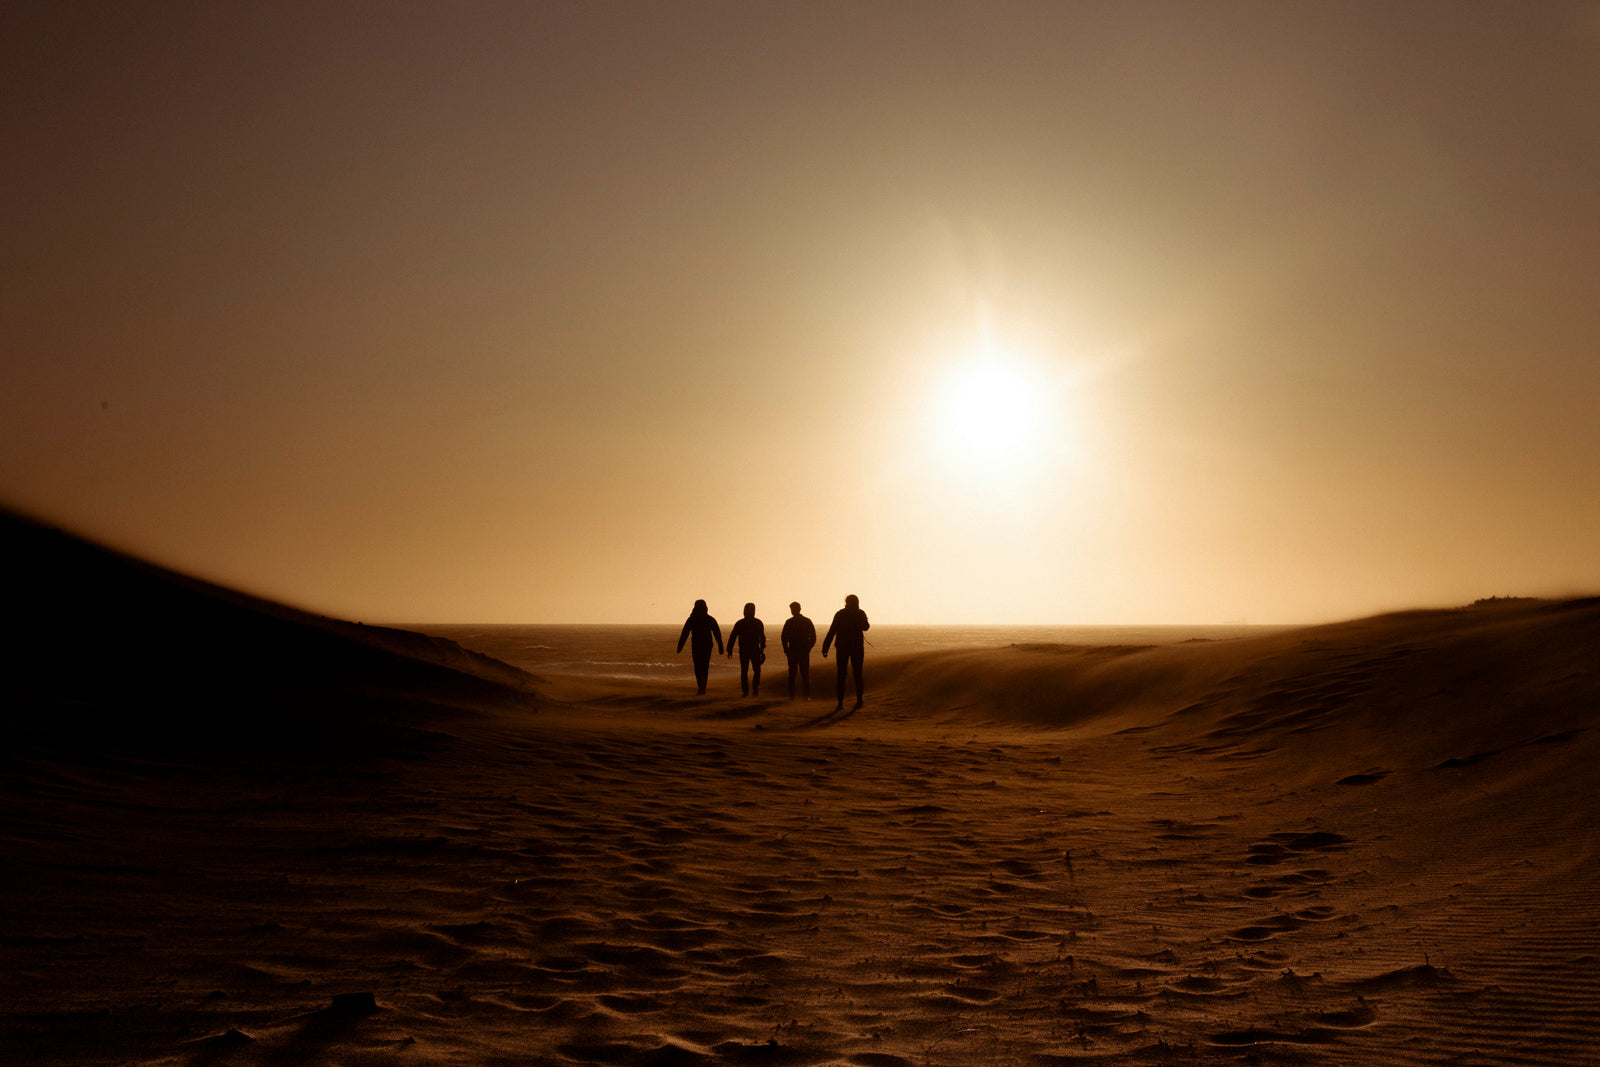 Silhouette of four people walking on desert dunes against a dramatic sunset